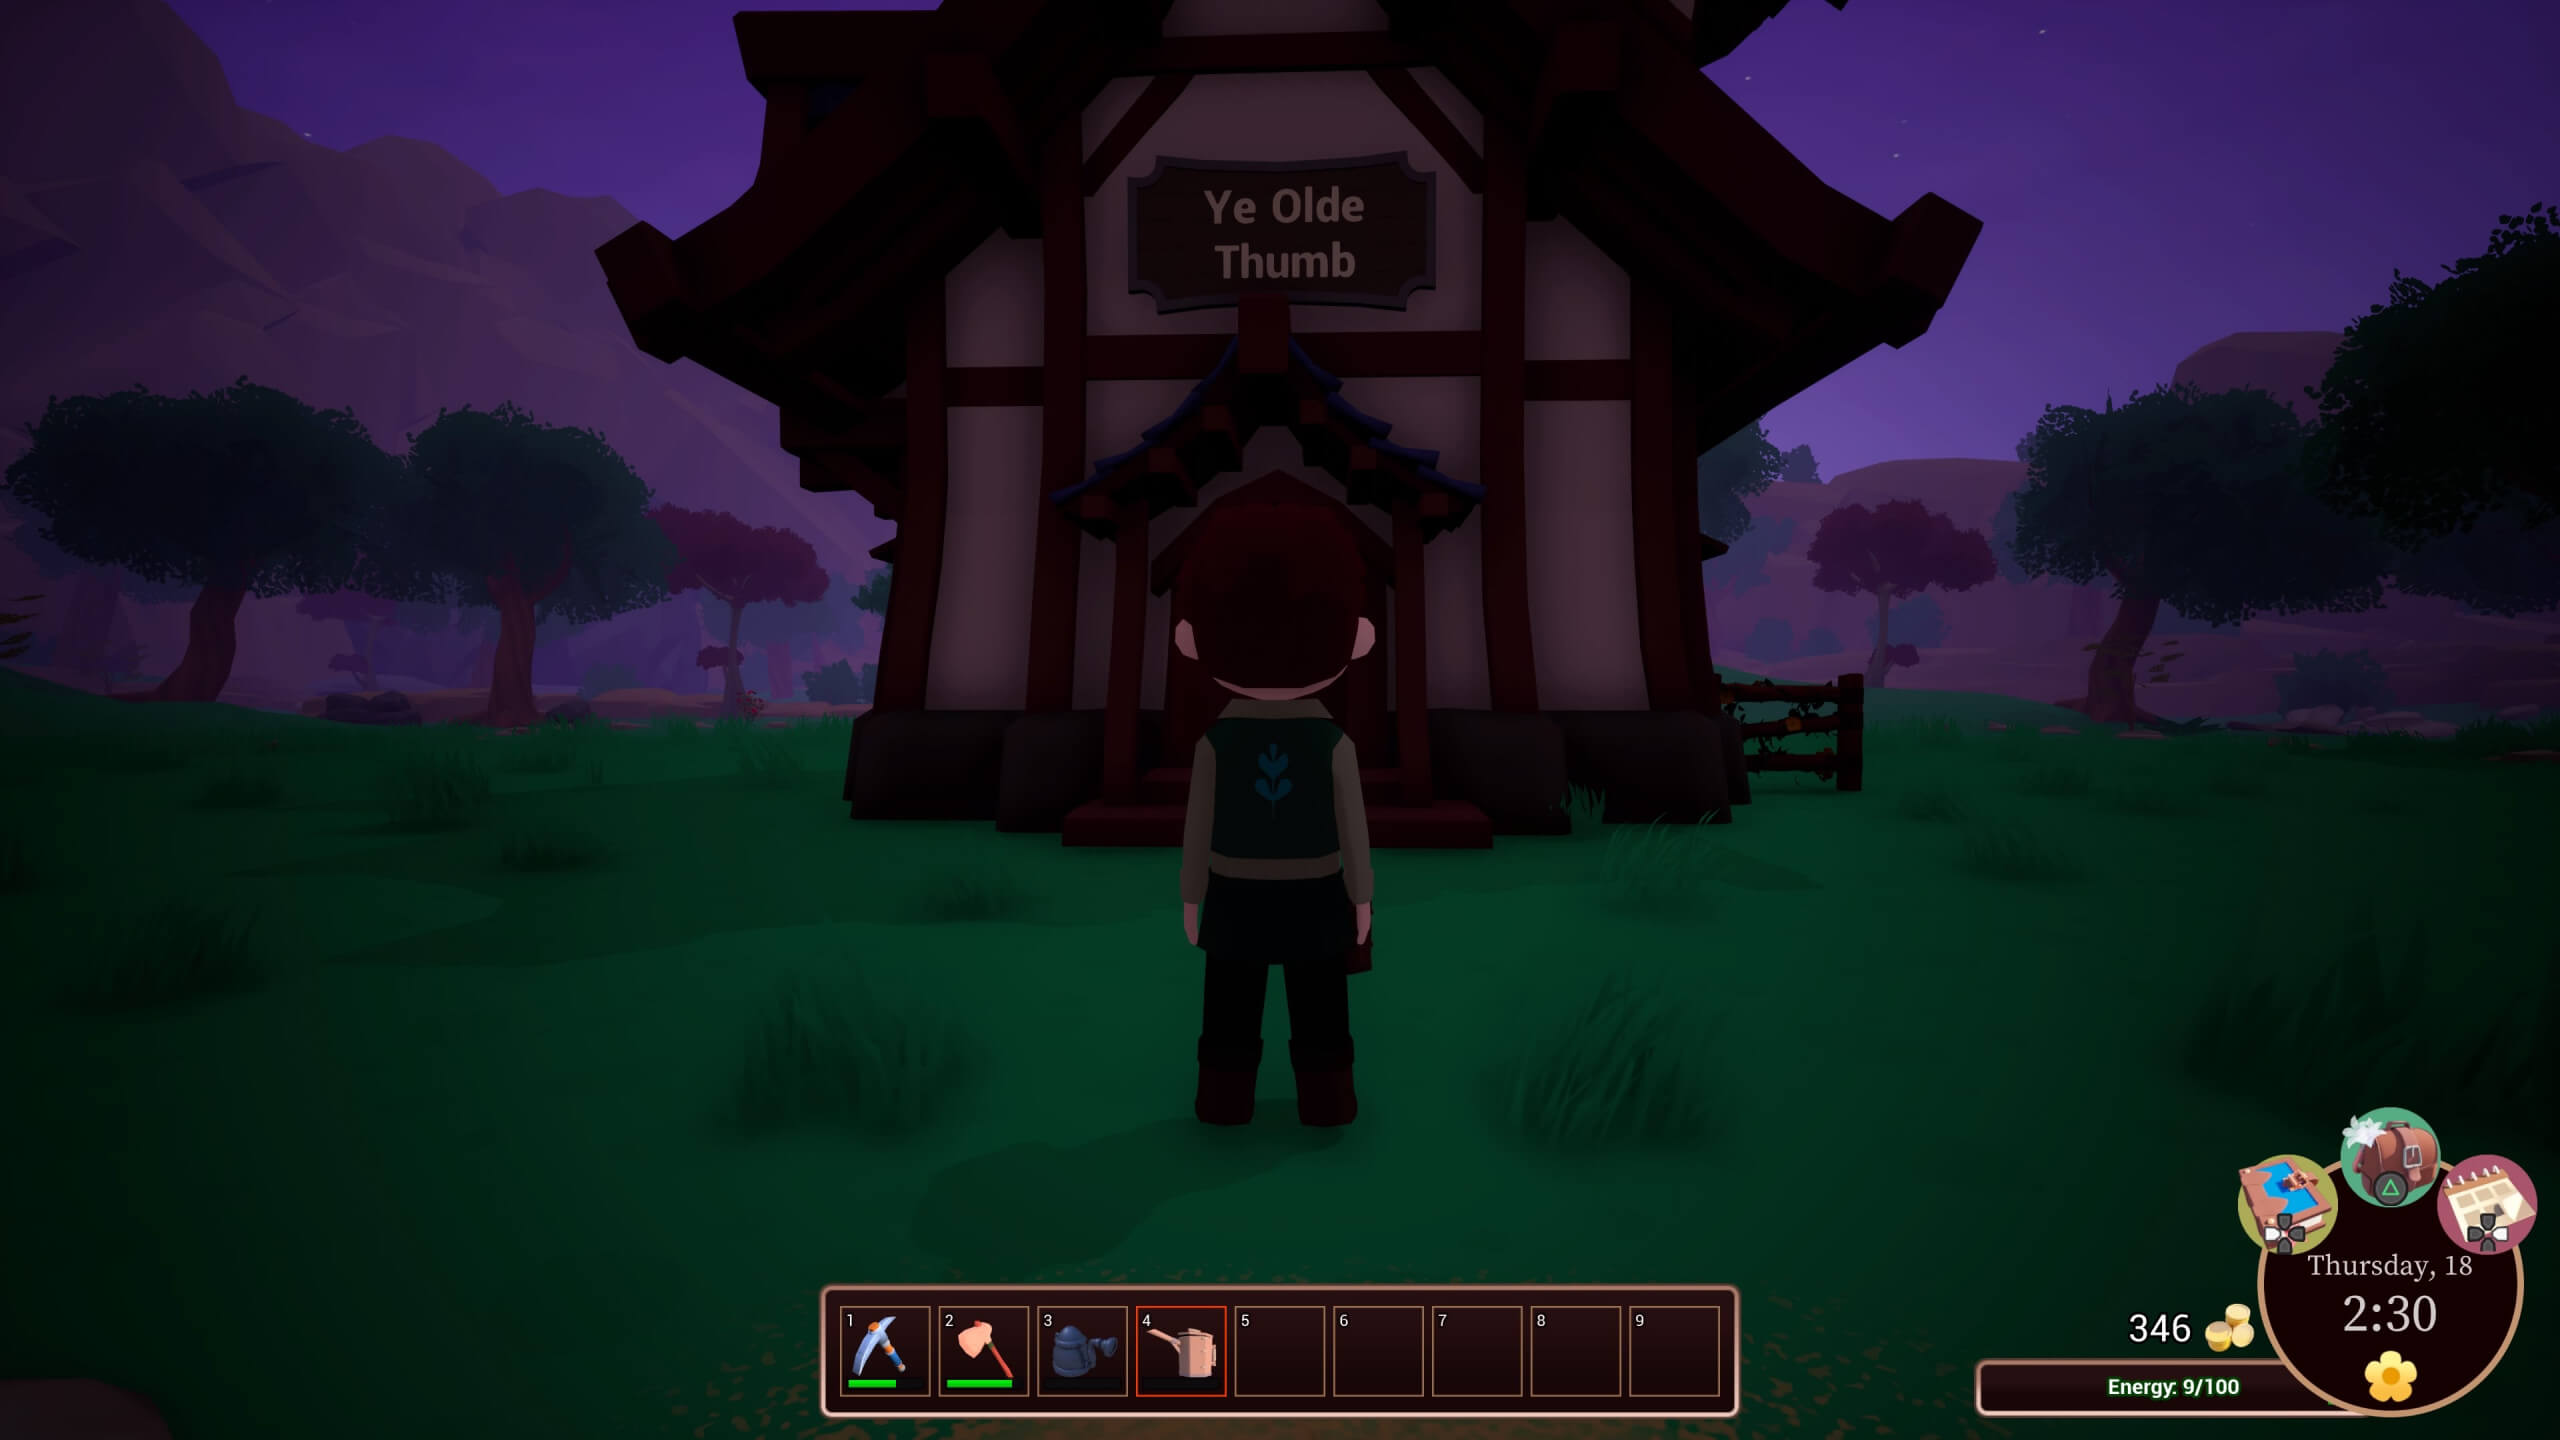 An image showing the name of the reviewers potion shop, named "Ye Olde Thumb"